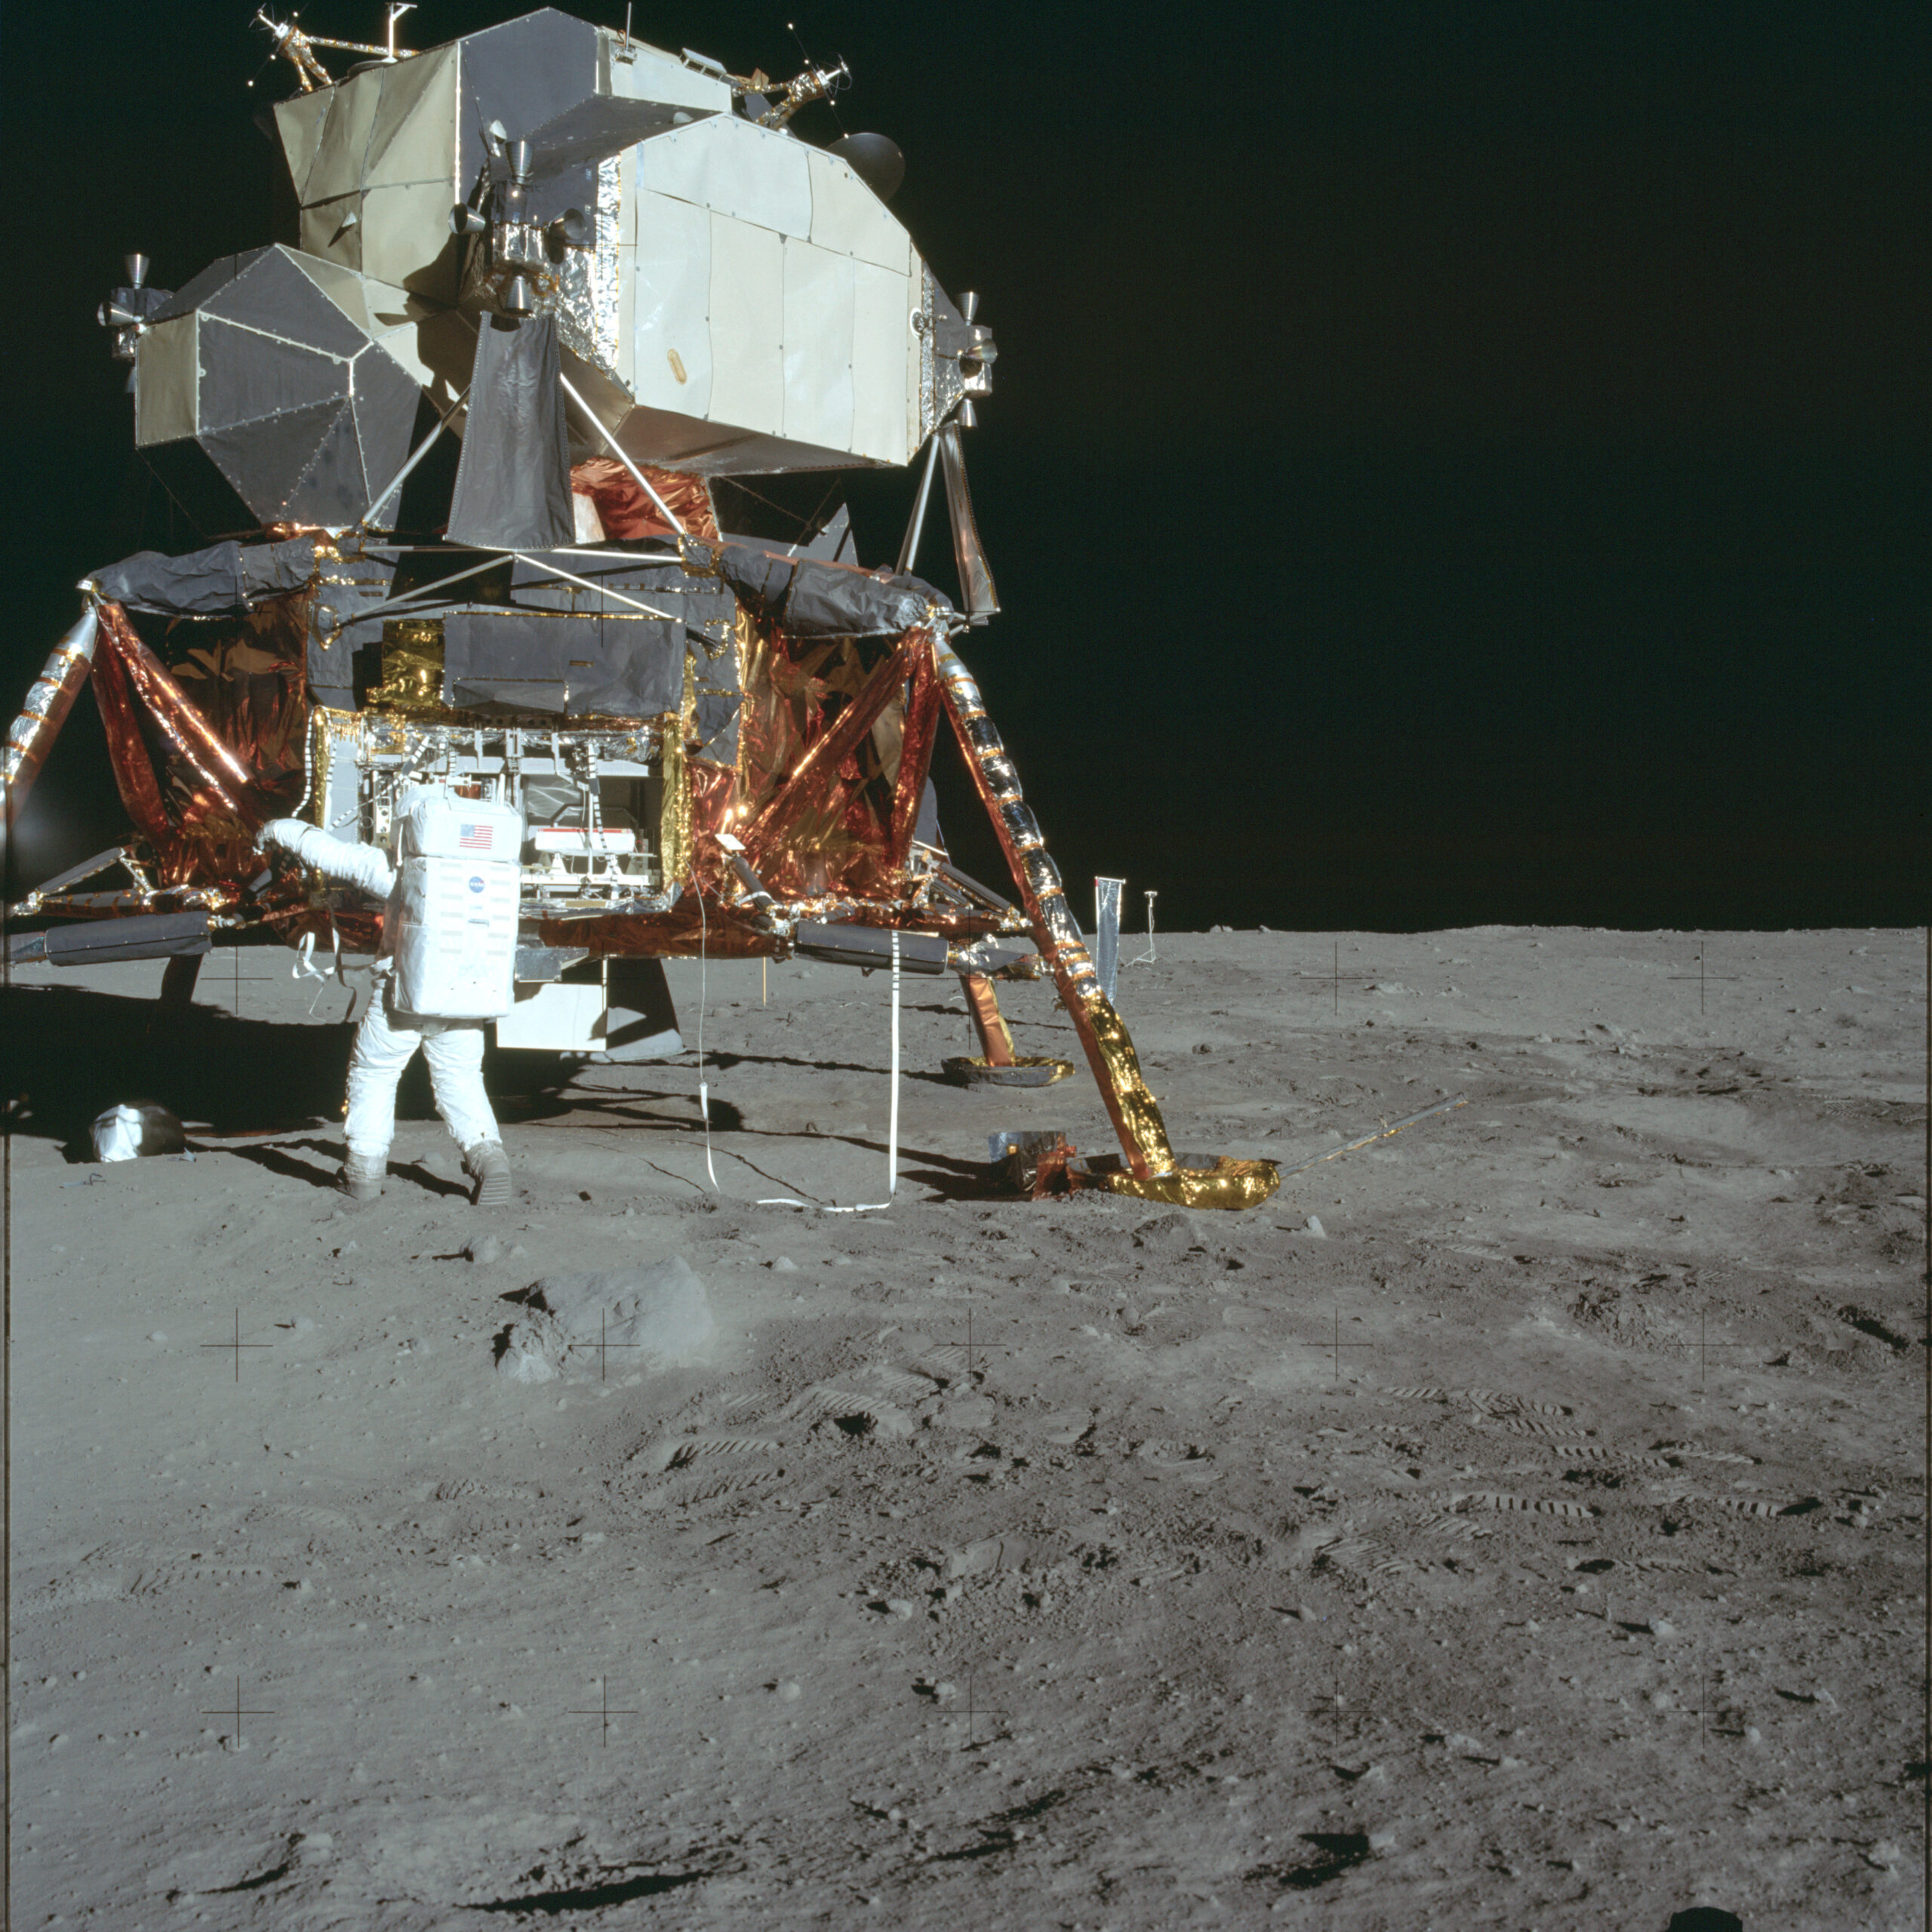 How Apollo 11’s astronauts spent their 22 hours on the moon